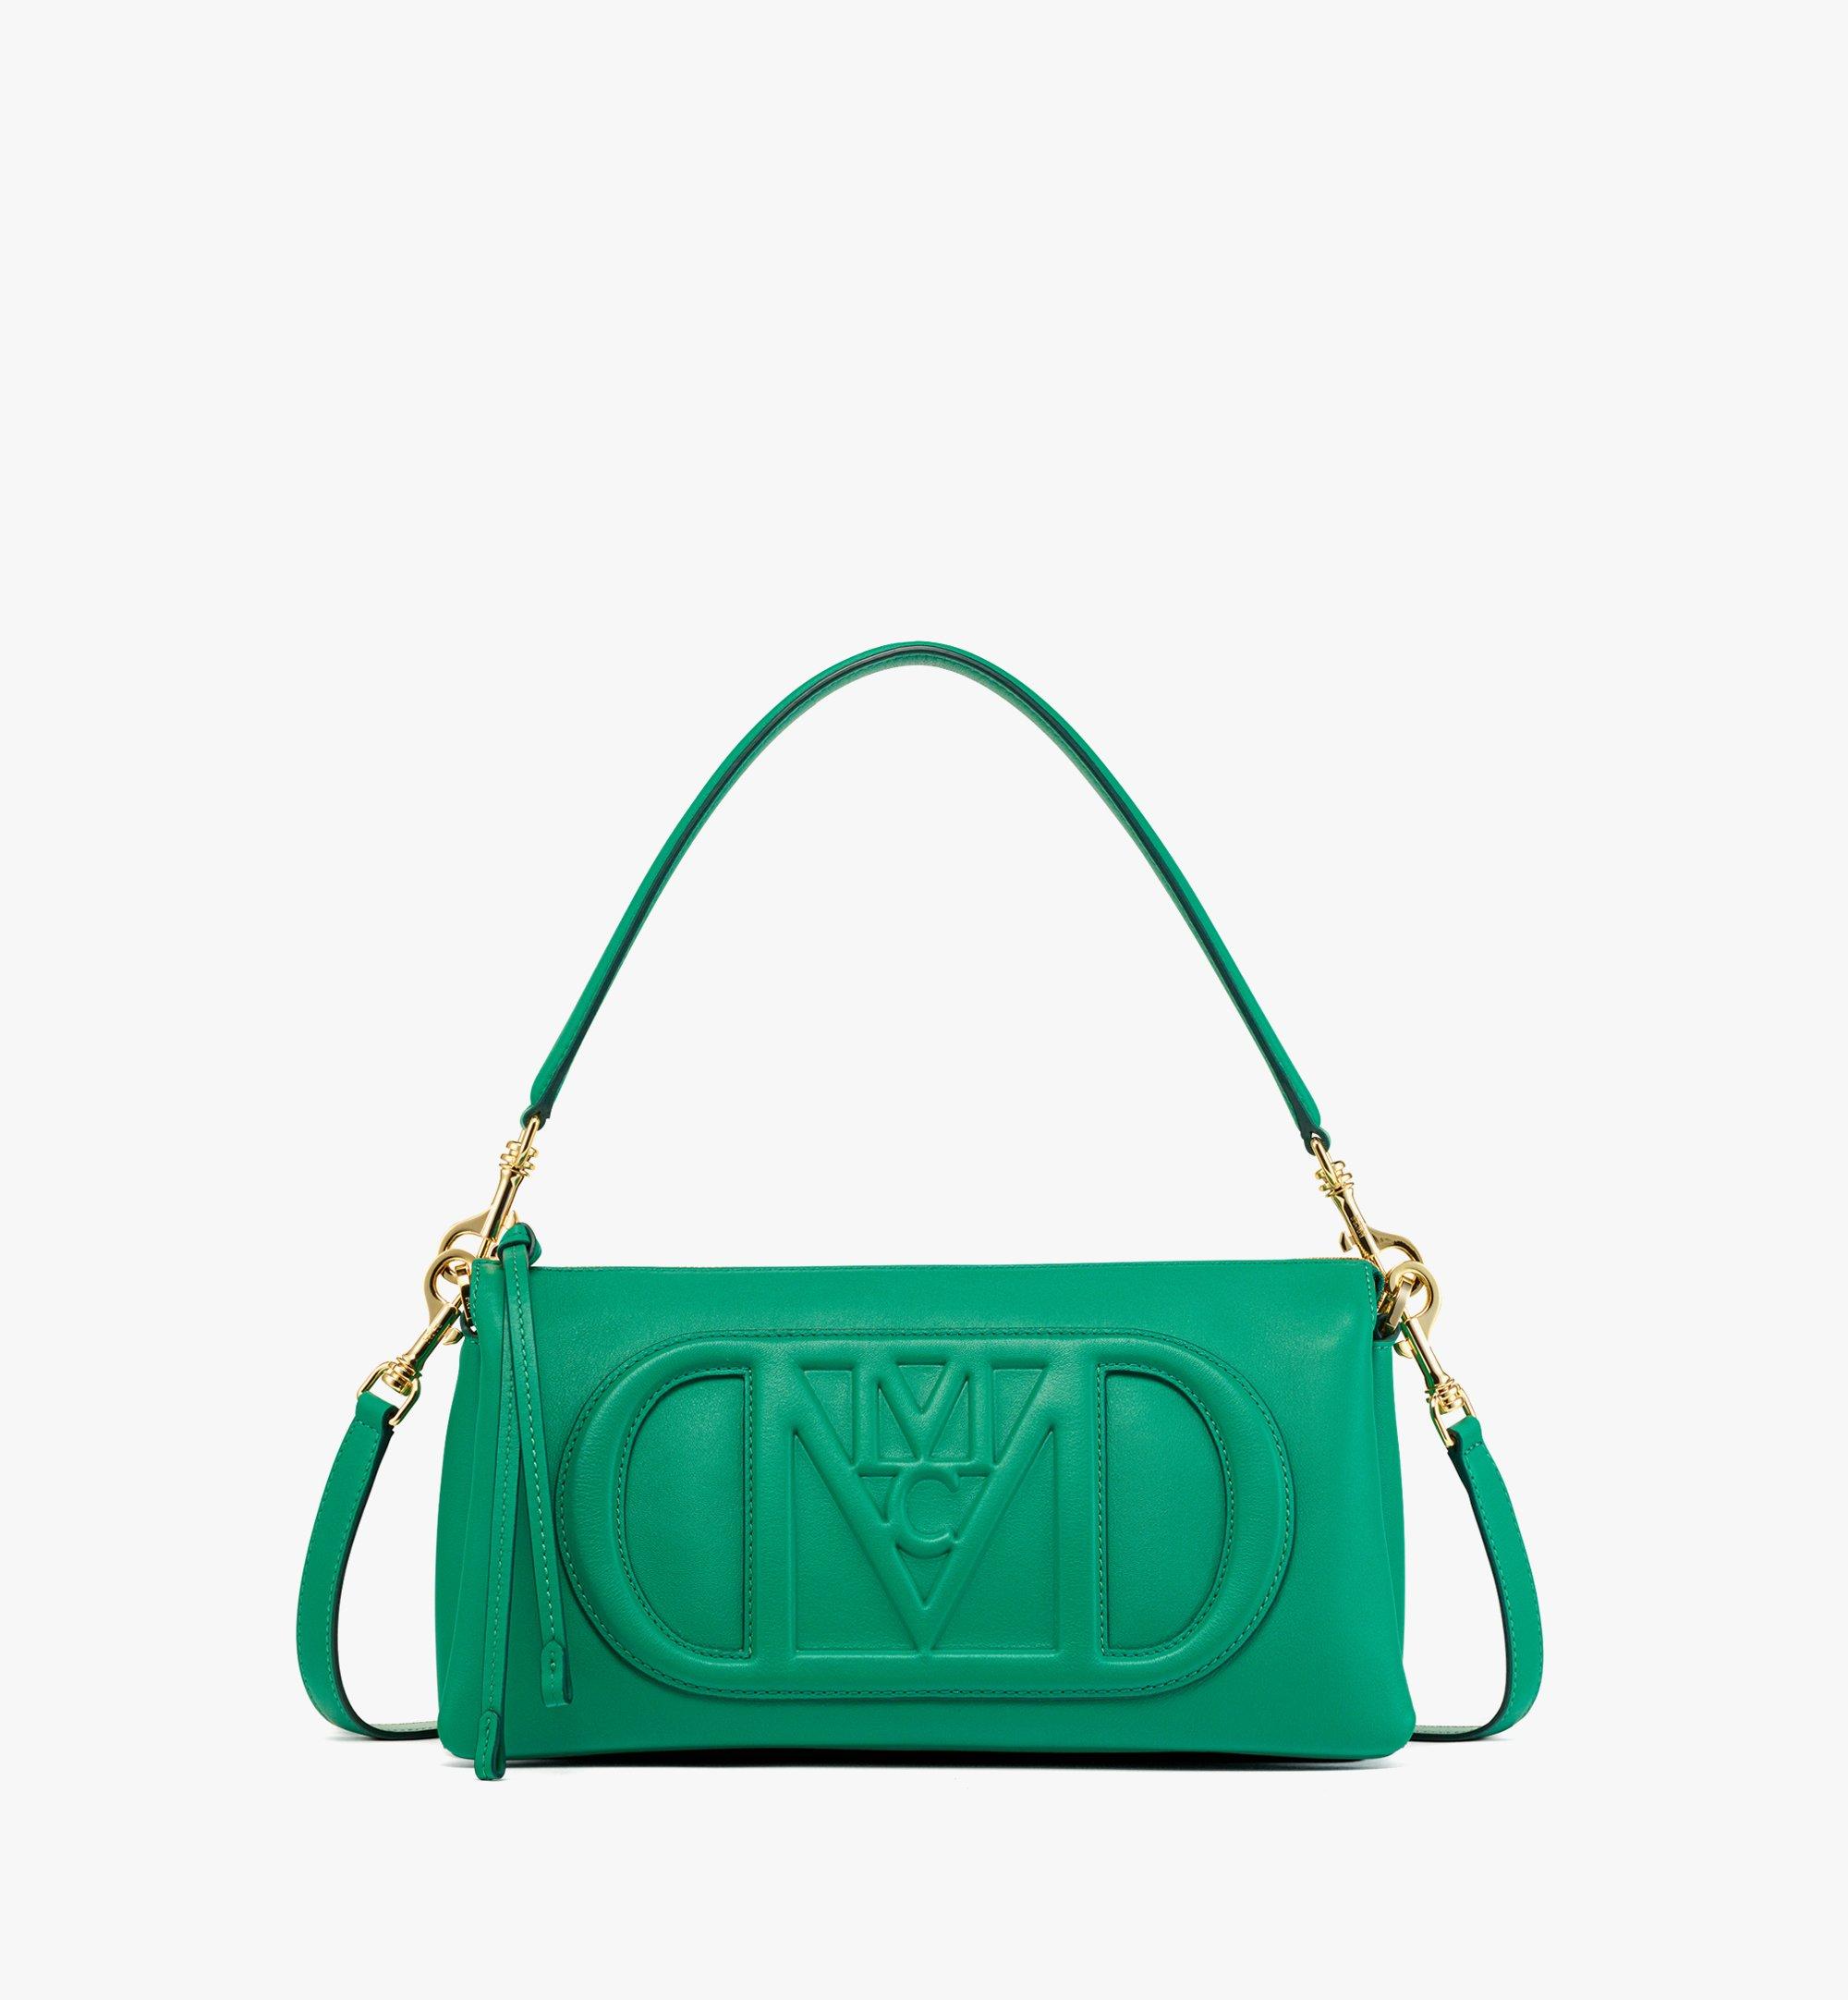 Authentic Valentino Supervee Crossbody Small Green Leather Bag